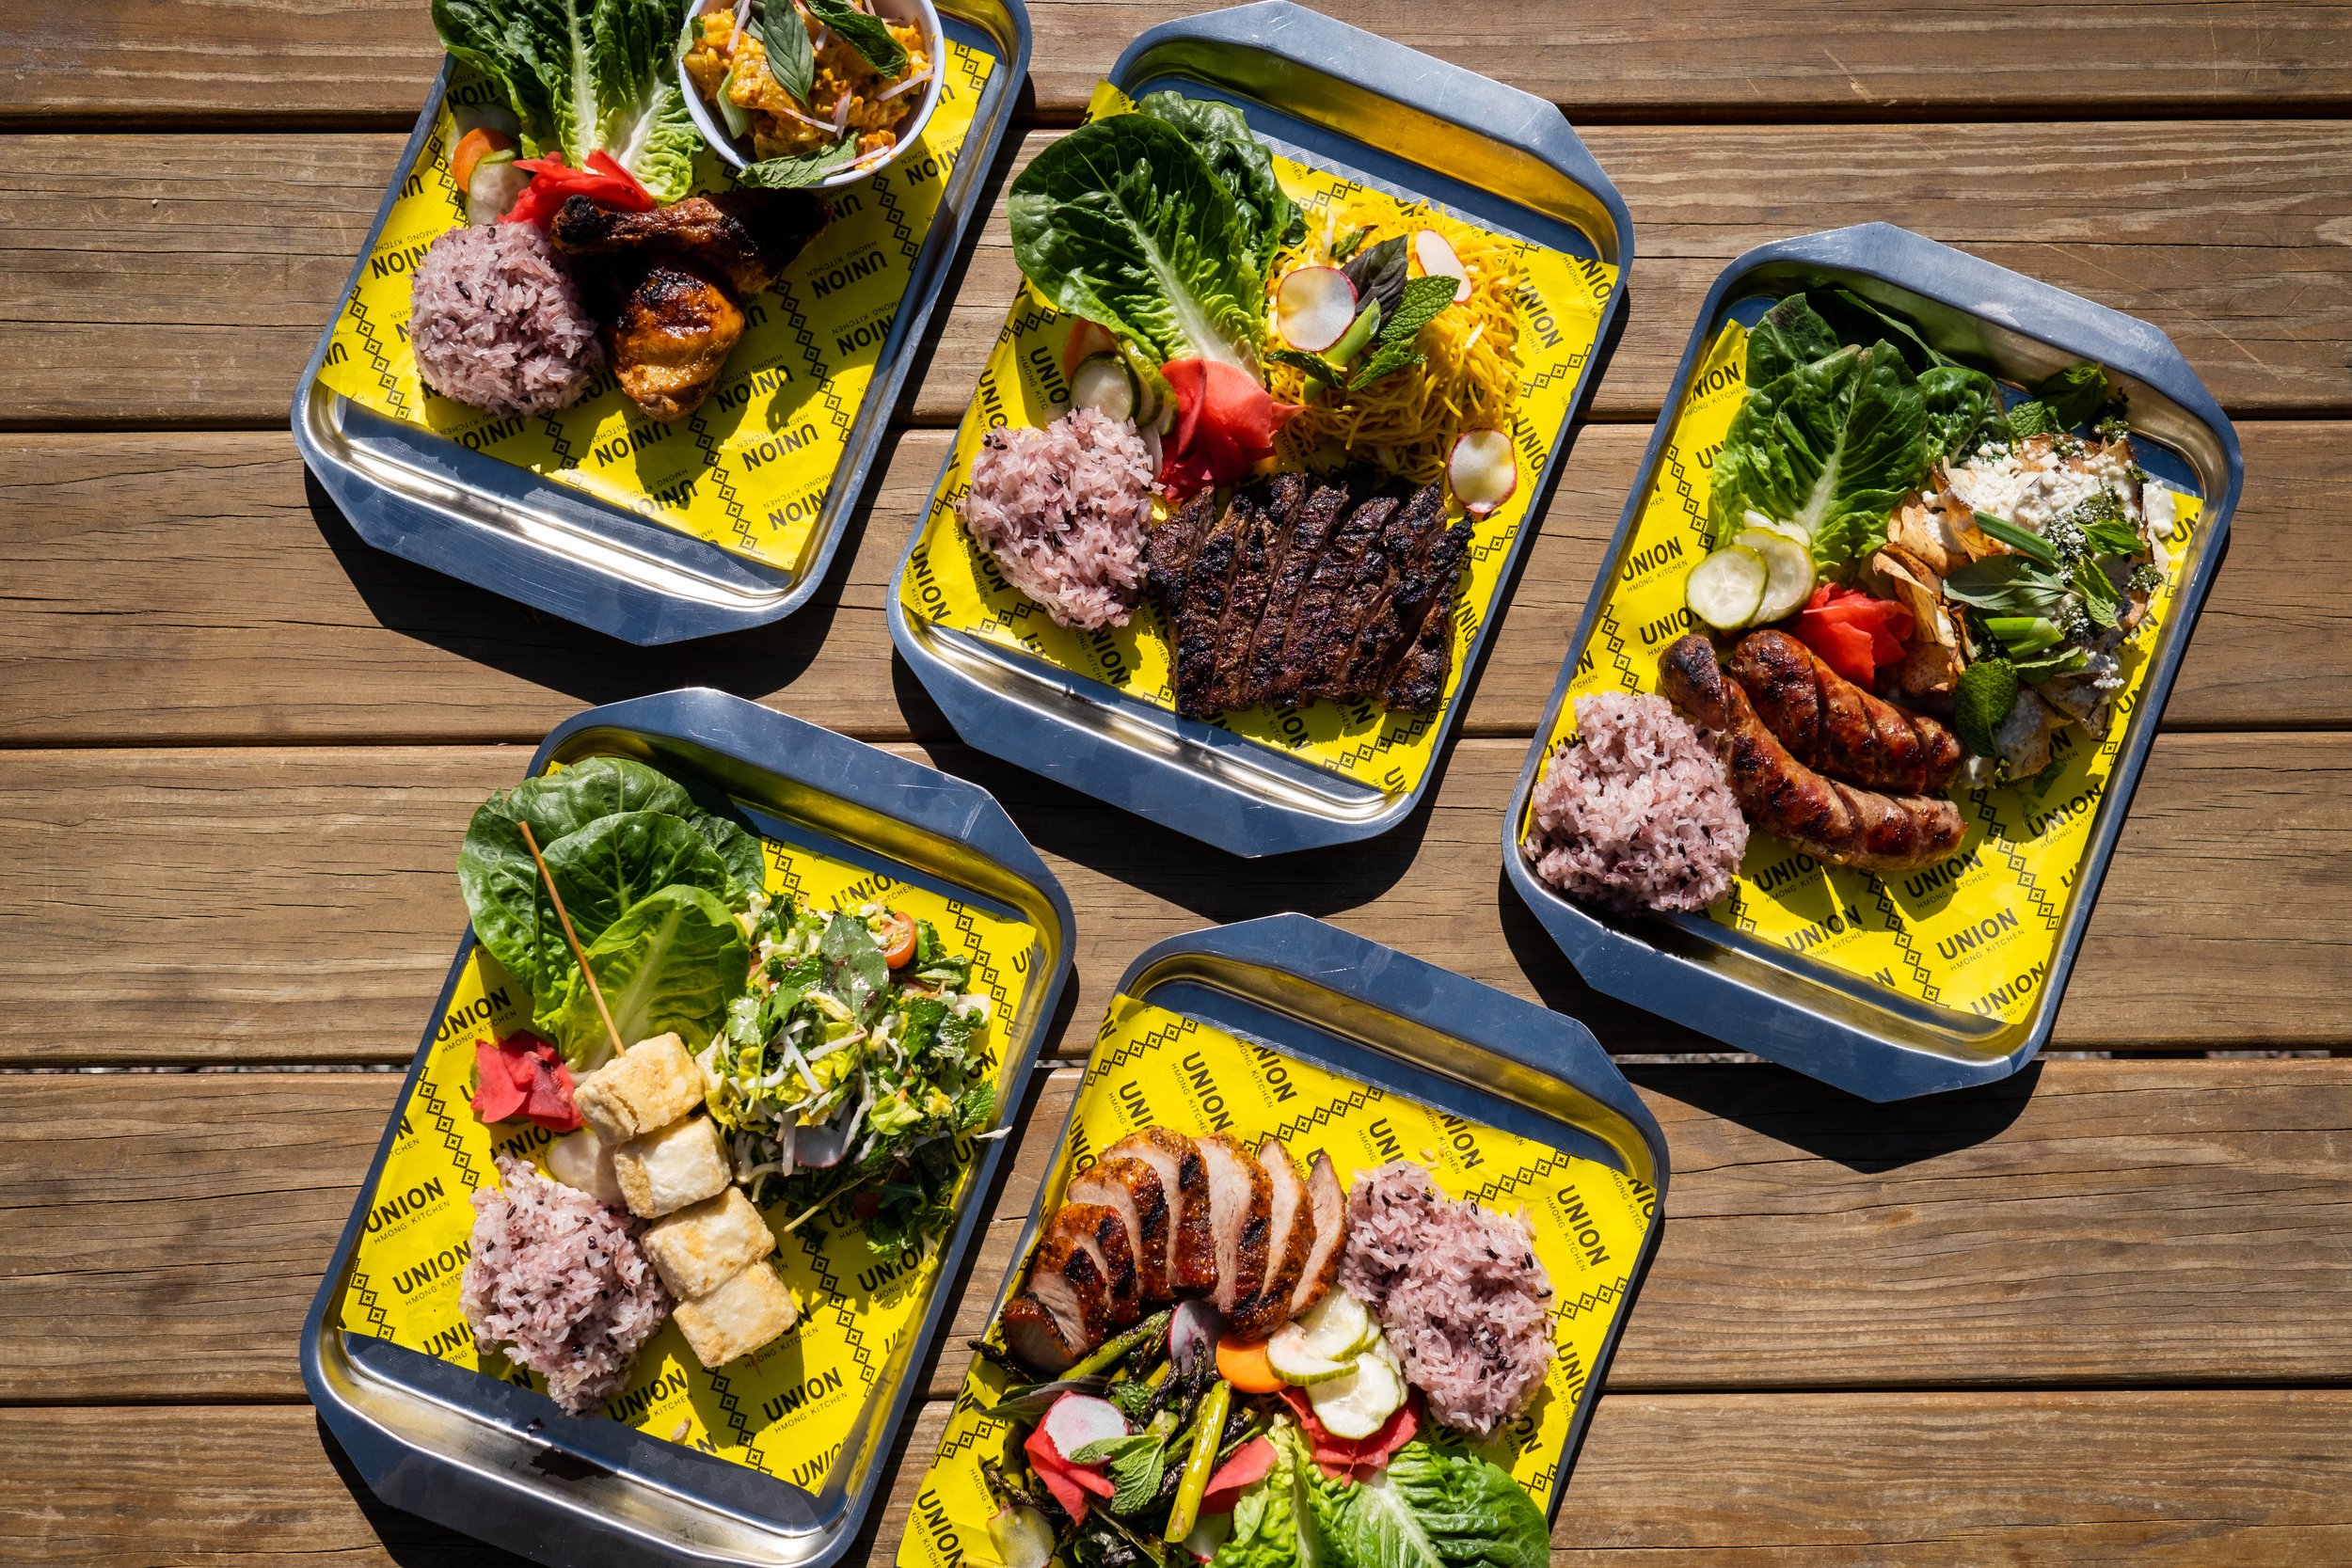 Five rectangular silver trays showing foods from the menu of Union Hmong Kitchen in Minneapolis, MN. The trays carry a variety of meats, purple sticky rice and some vegetables.